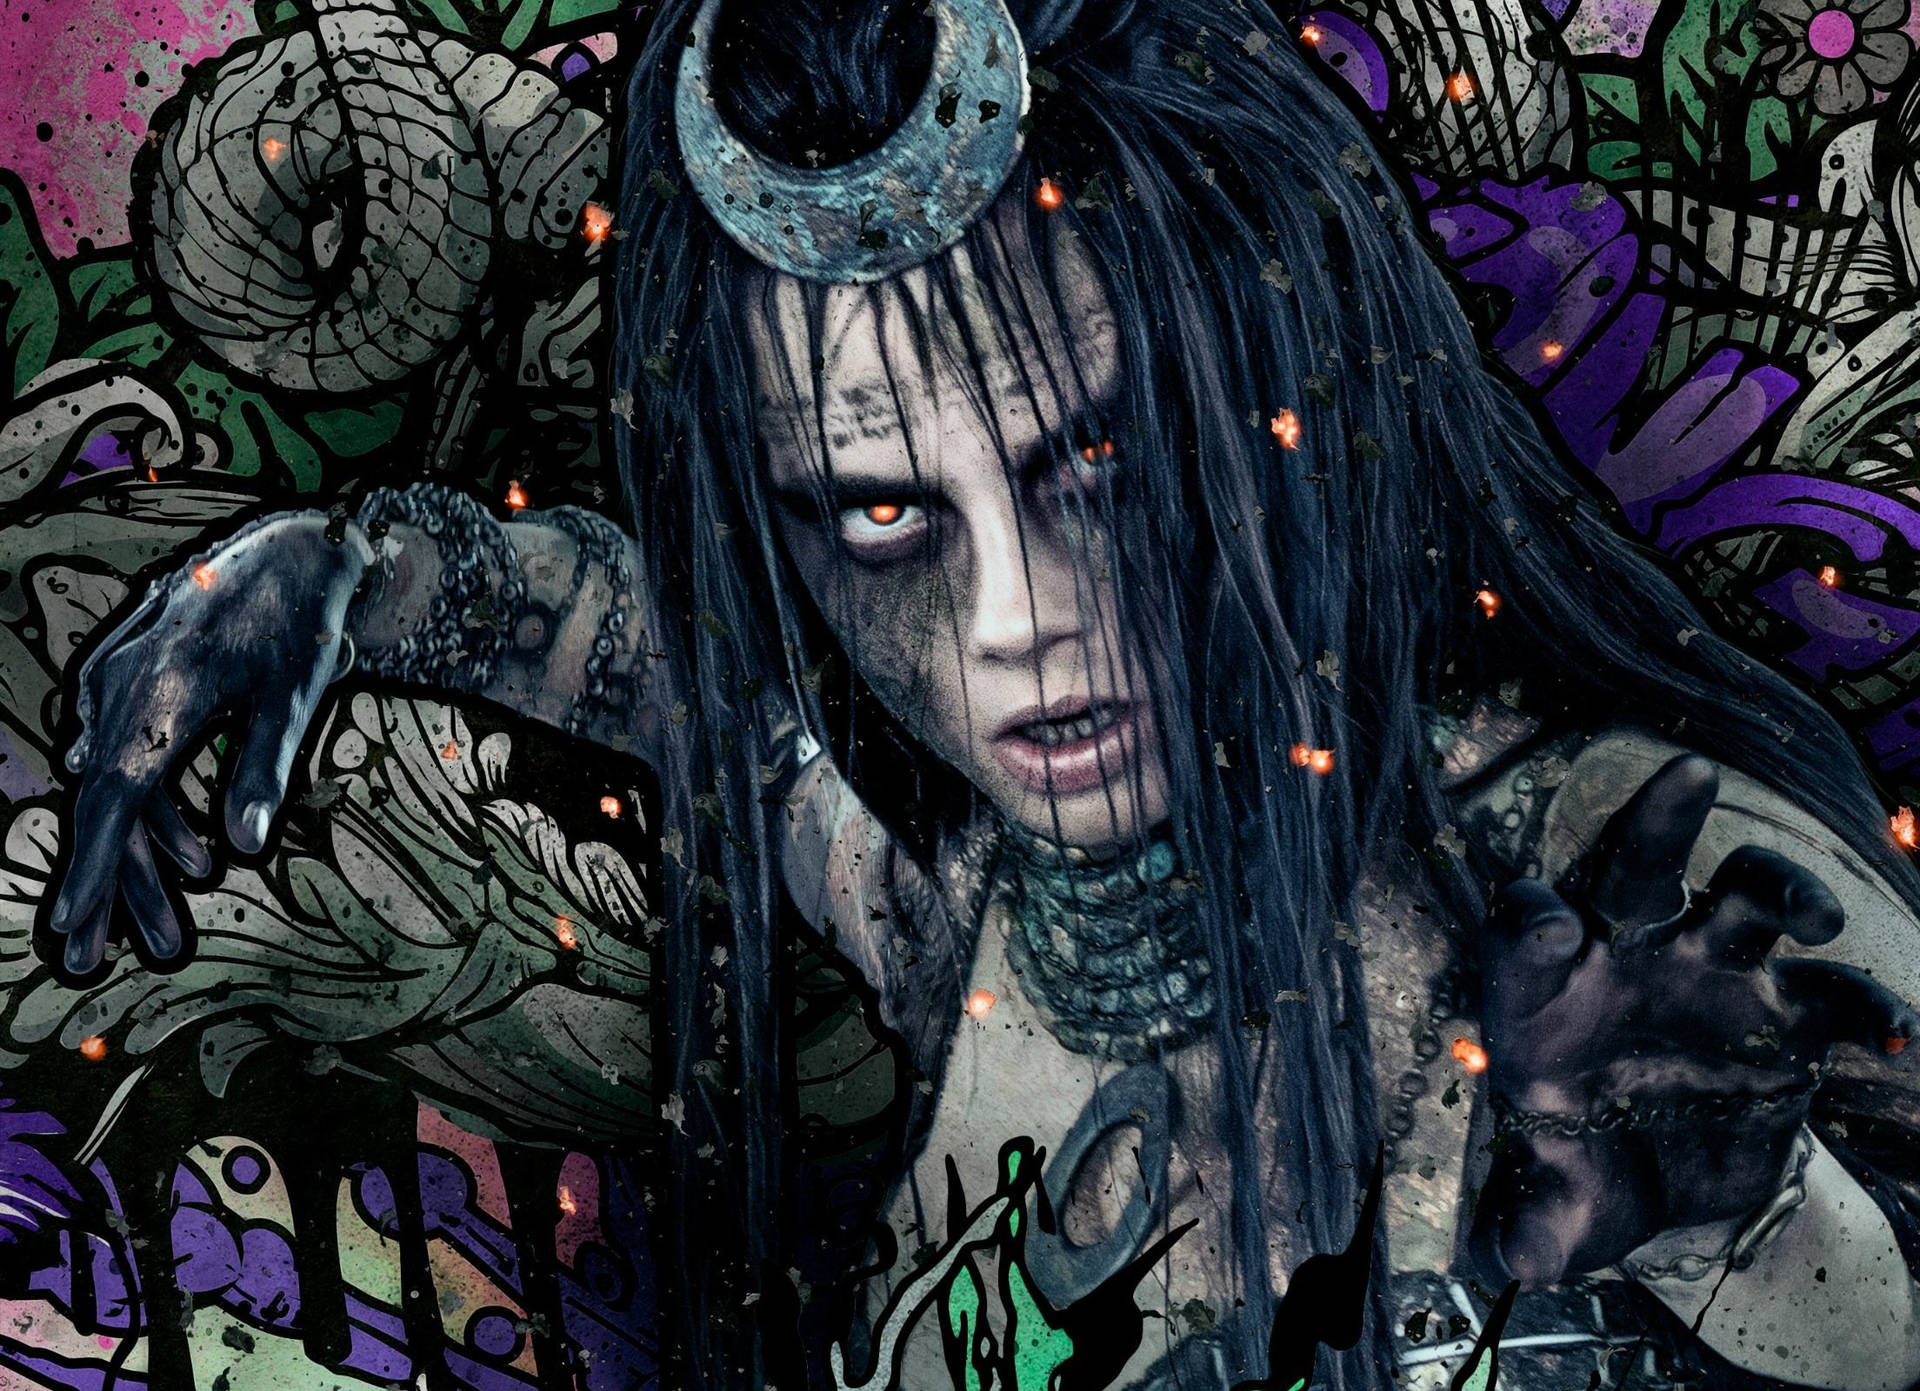 Enchantress from Suicide Squad; a Mischievous and Misunderstood Supervillain Wallpaper